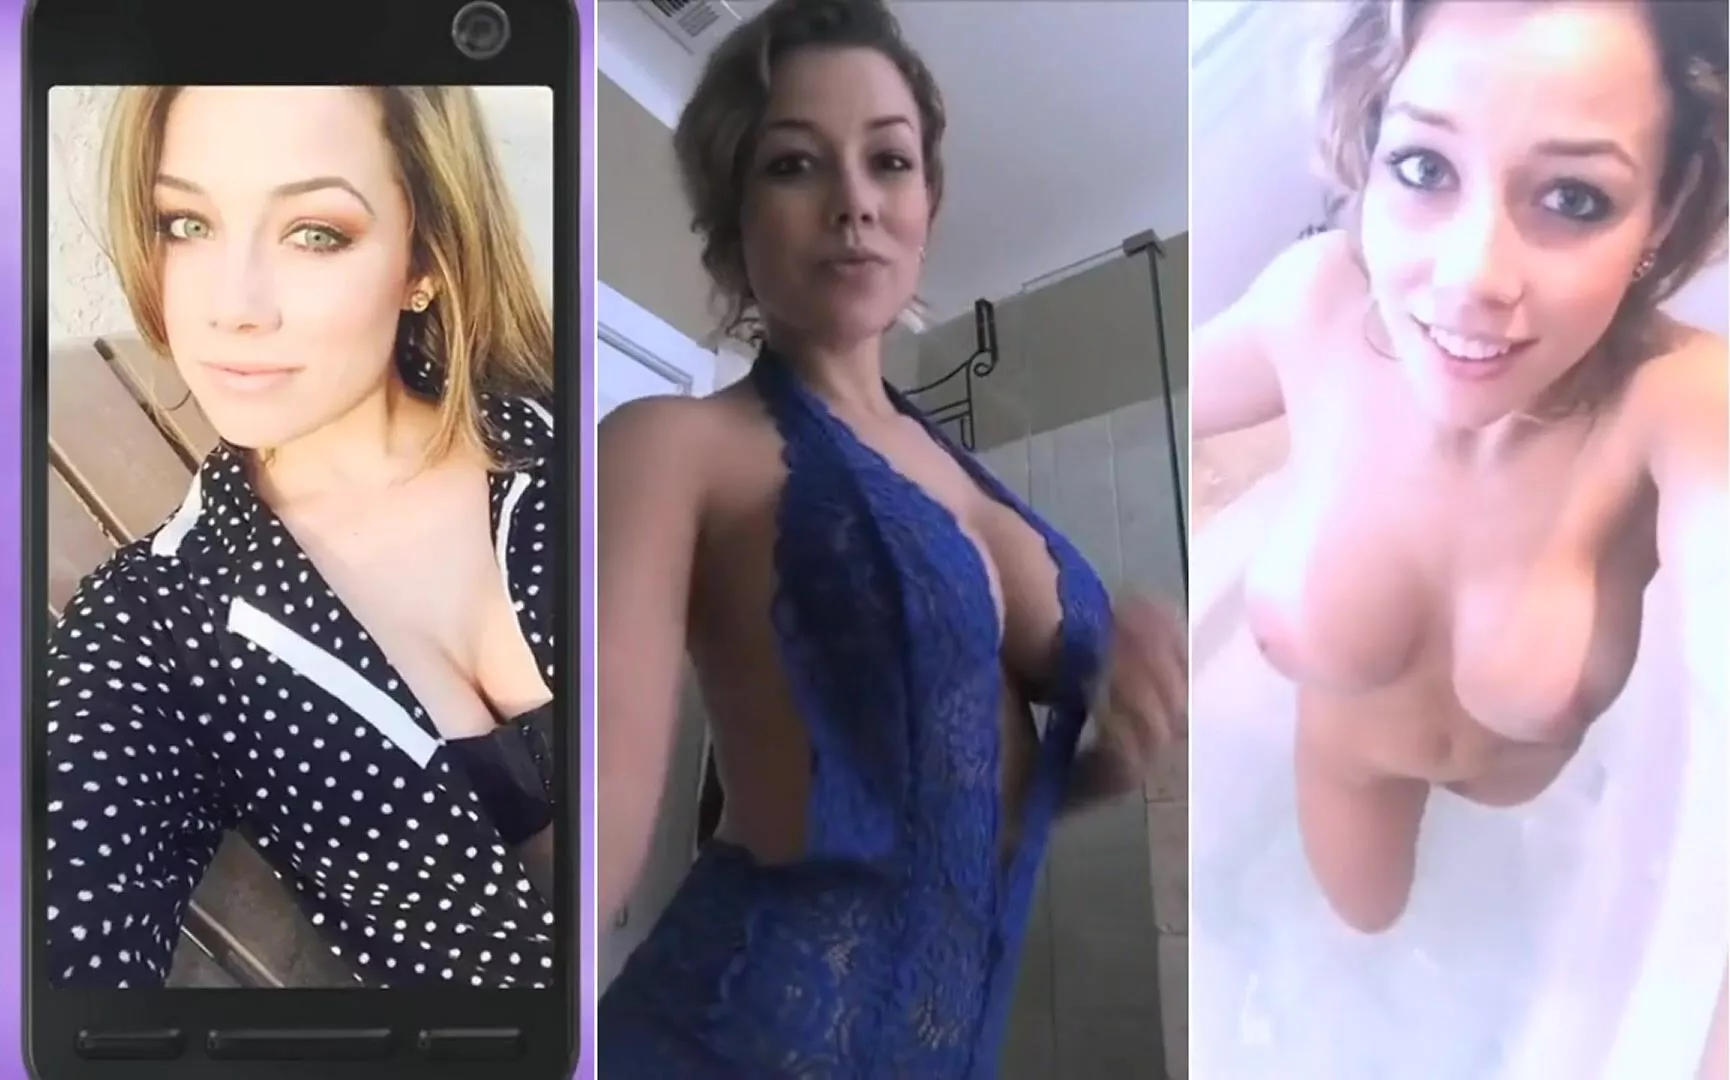 christie layne recommends playboy tv private selfies pic